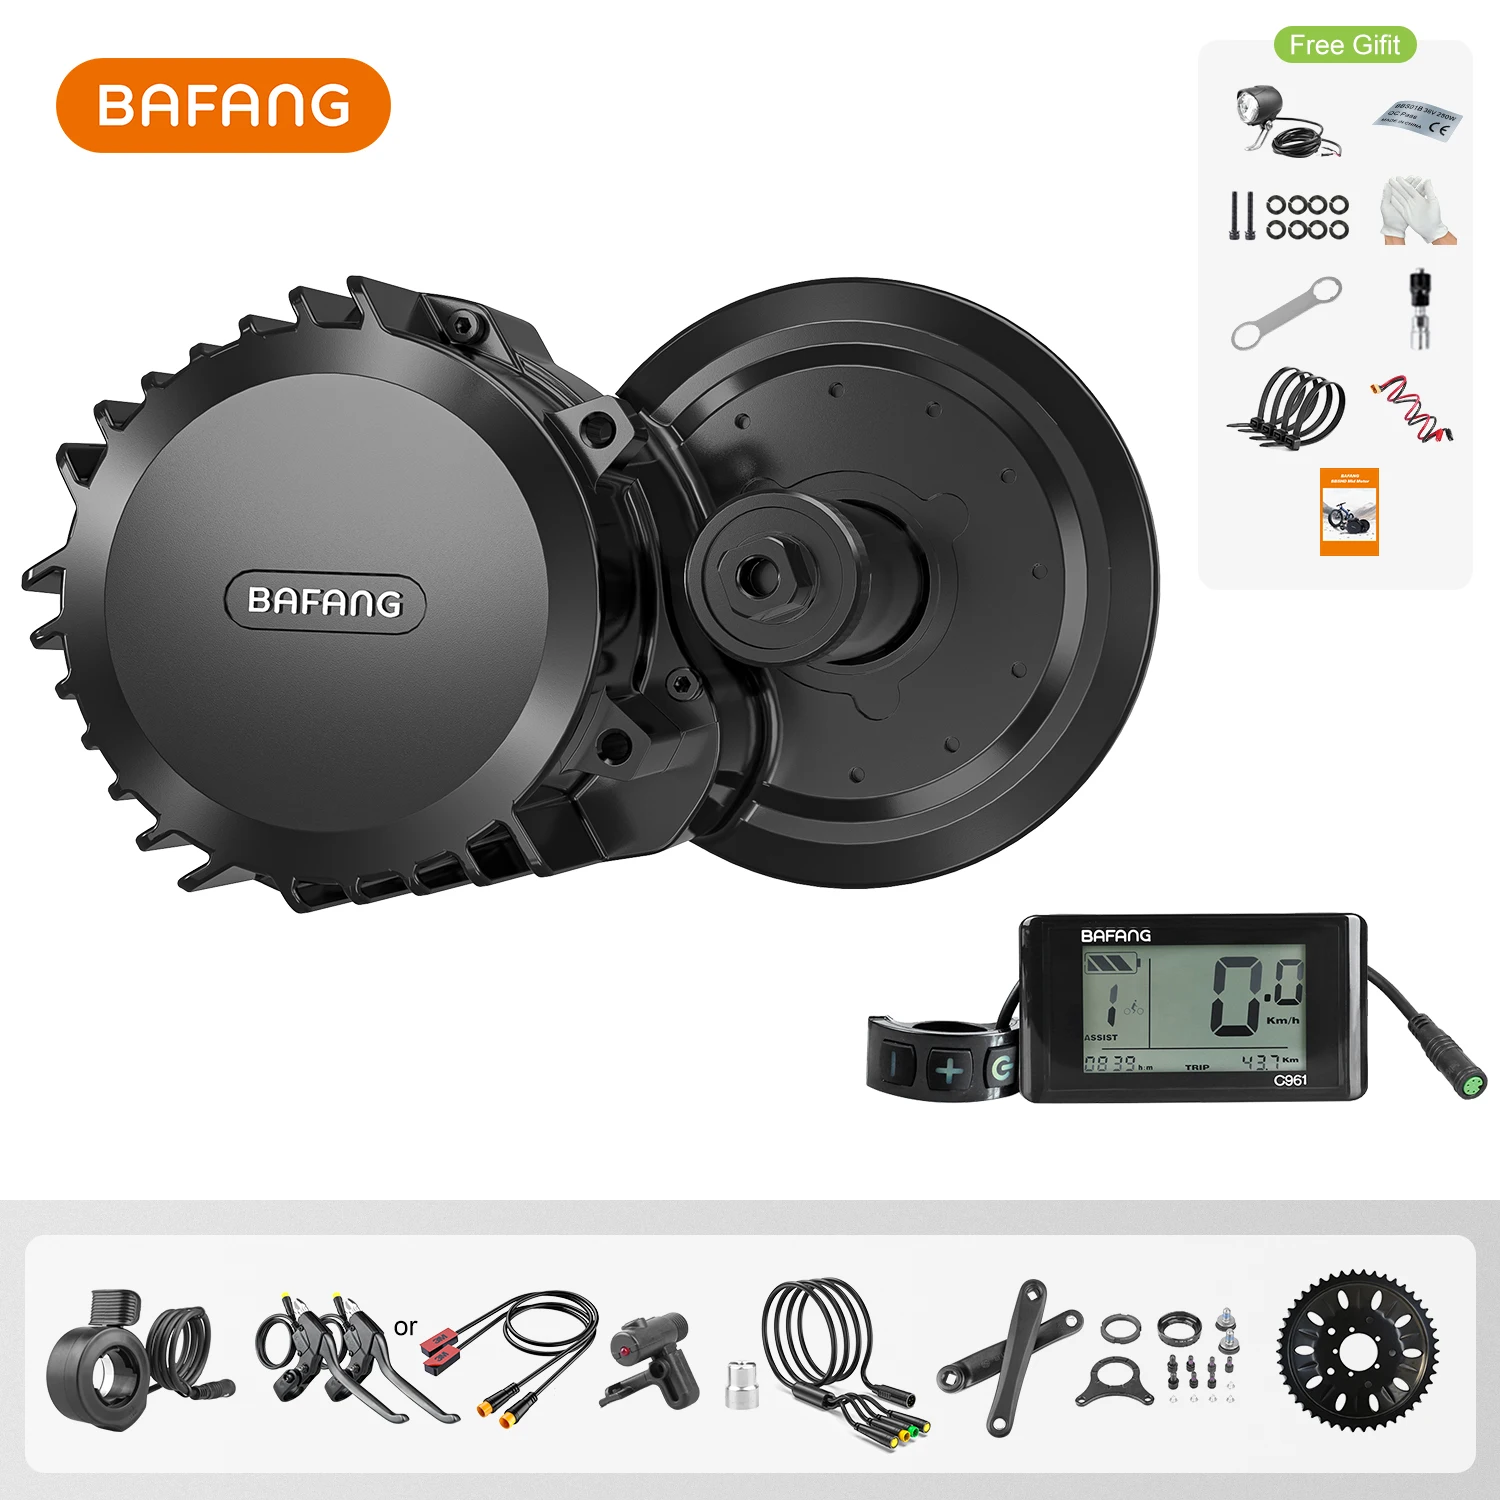 

Bafang BBS01 BBS02 BBSHD 48V 52V 1000W BBS02B 750W 500W 48V BBS01B 250W 36V Mid Drive Motor Electric Bicycle Conversion Kit